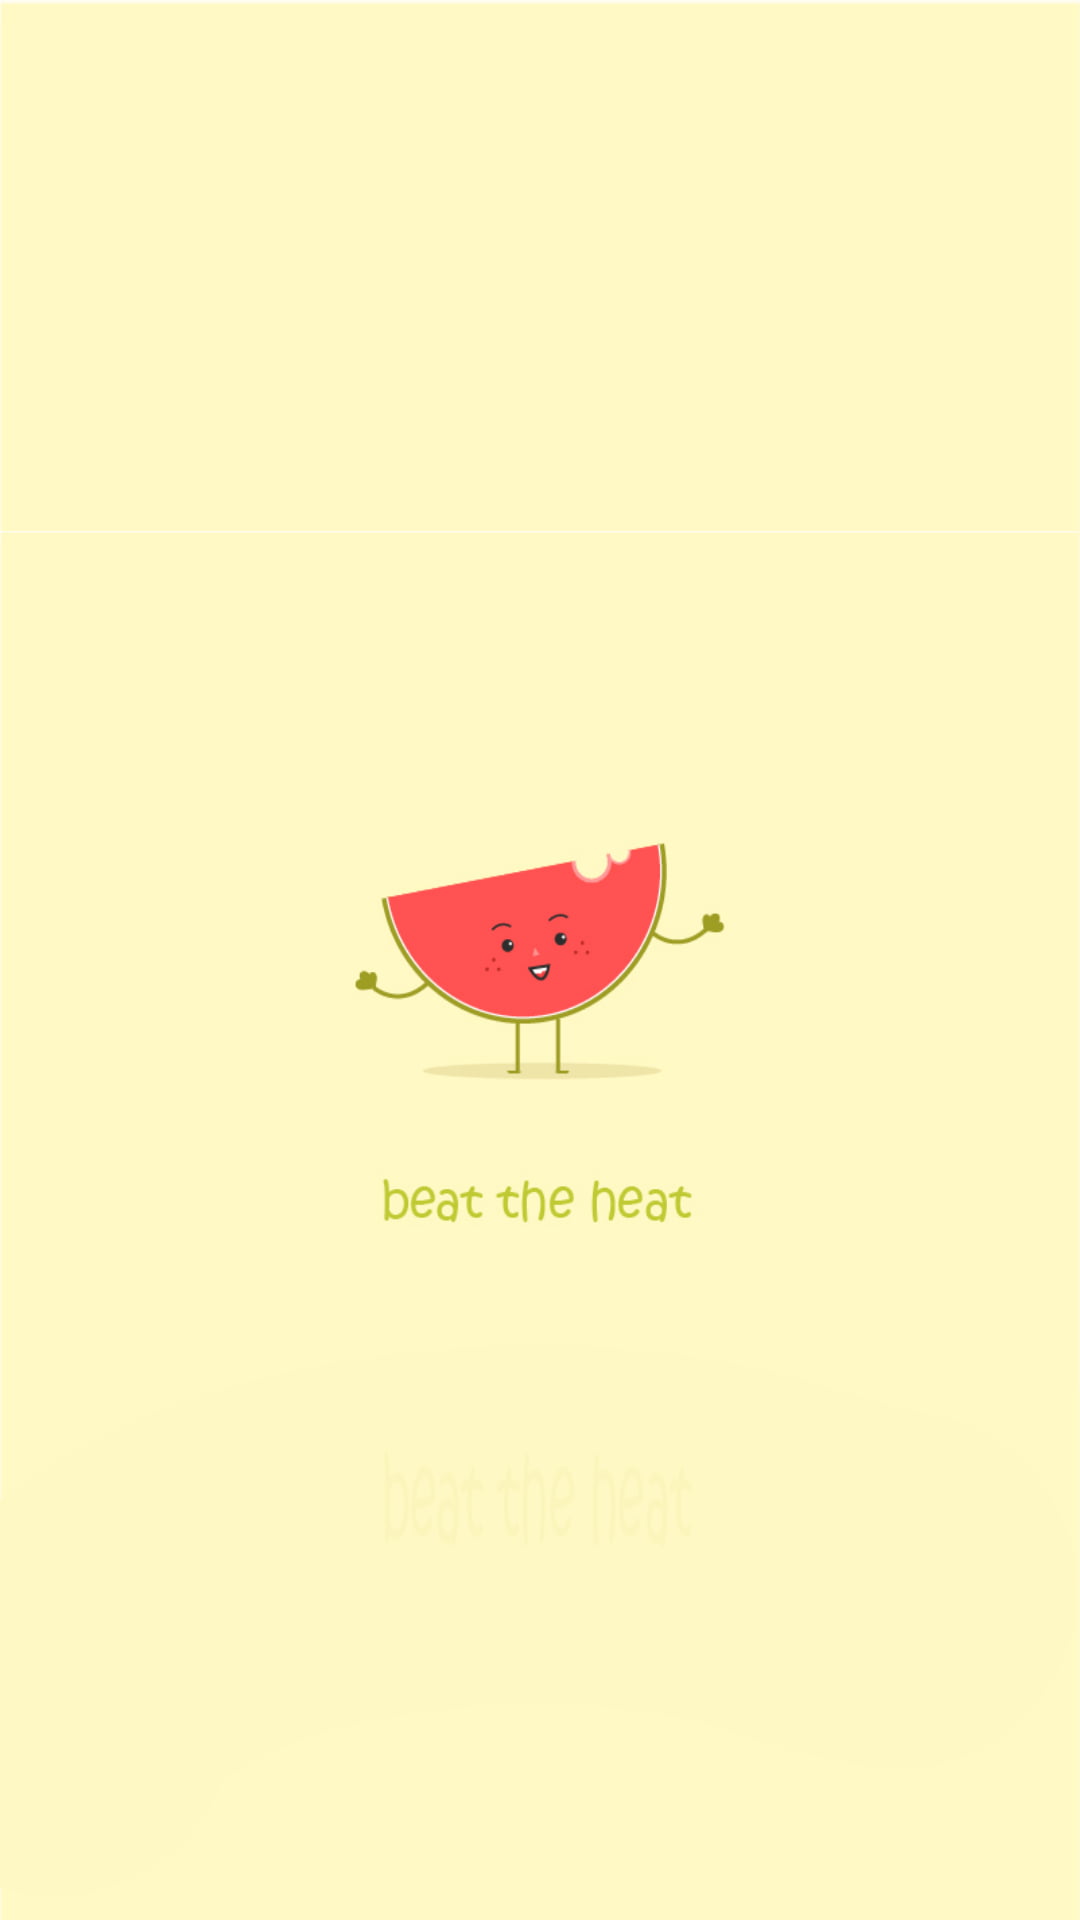 Download wallpaper 840x1336 summer watermelon leaves piece iphone 5  iphone 5s iphone 5c ipod touch 840x1336 hd background 21765